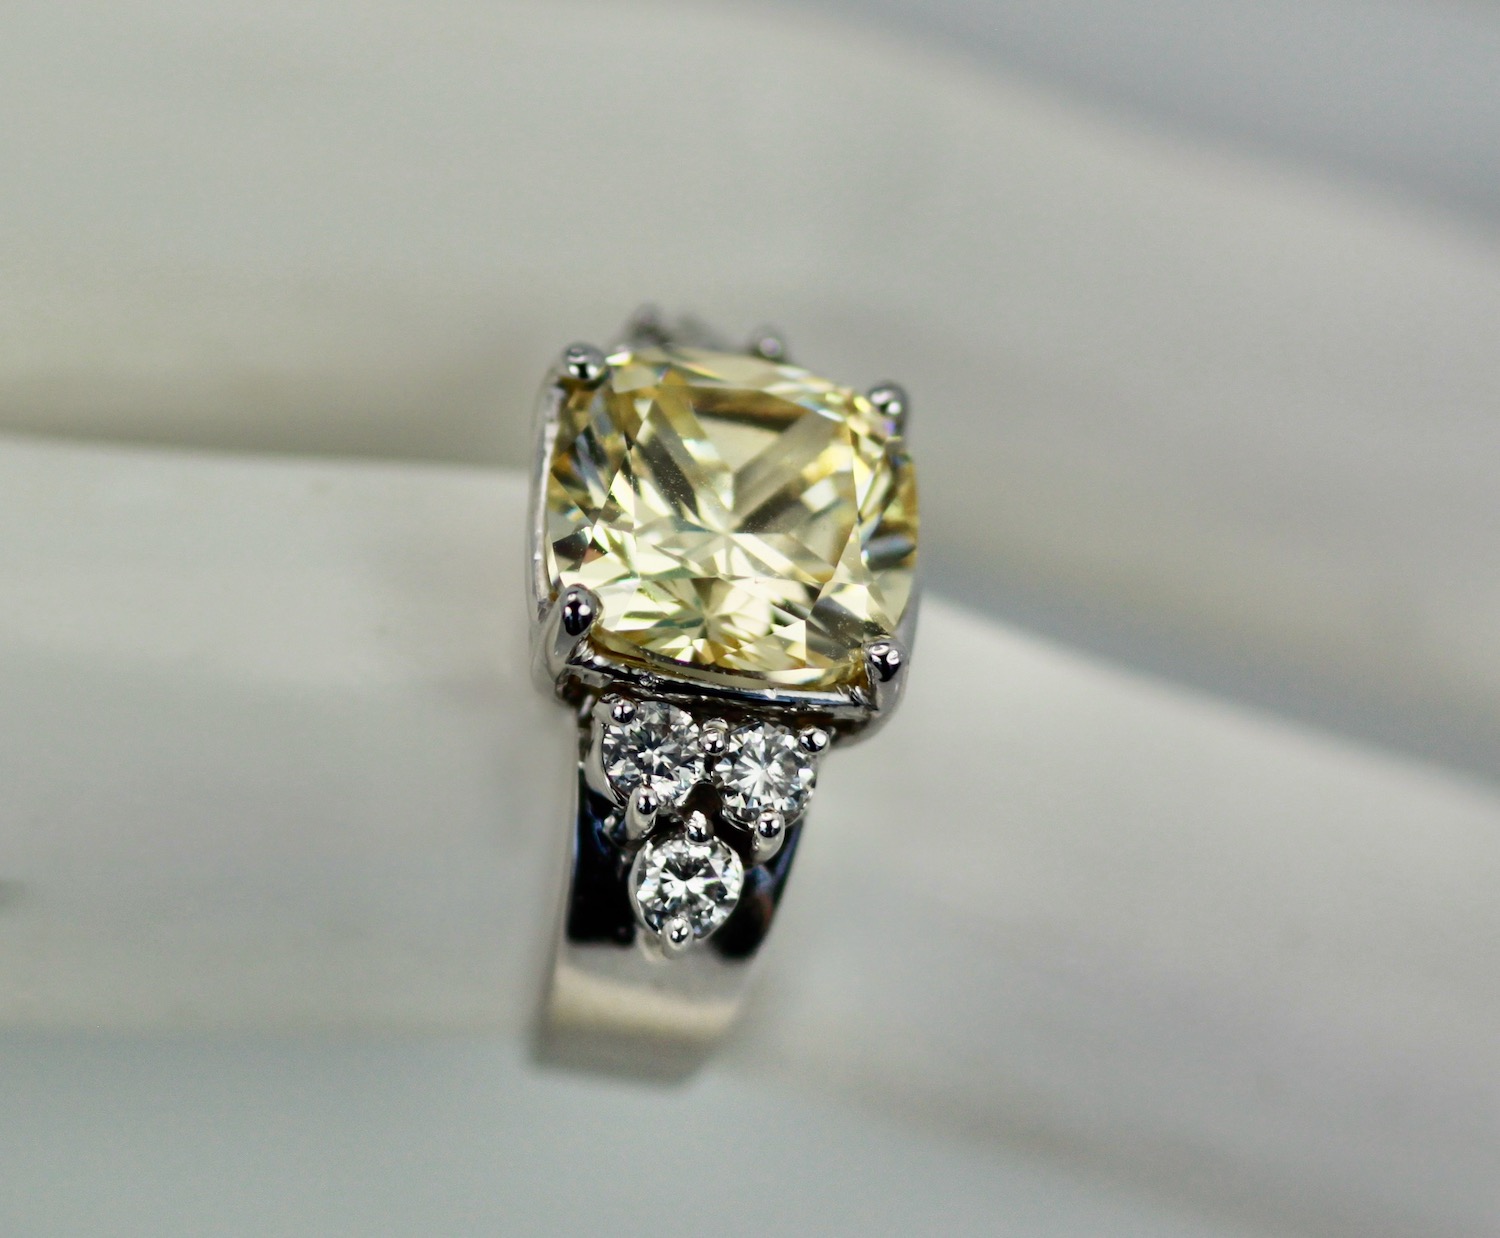 Large Yellow Sapphire Ring with Diamond Side Accents – side view